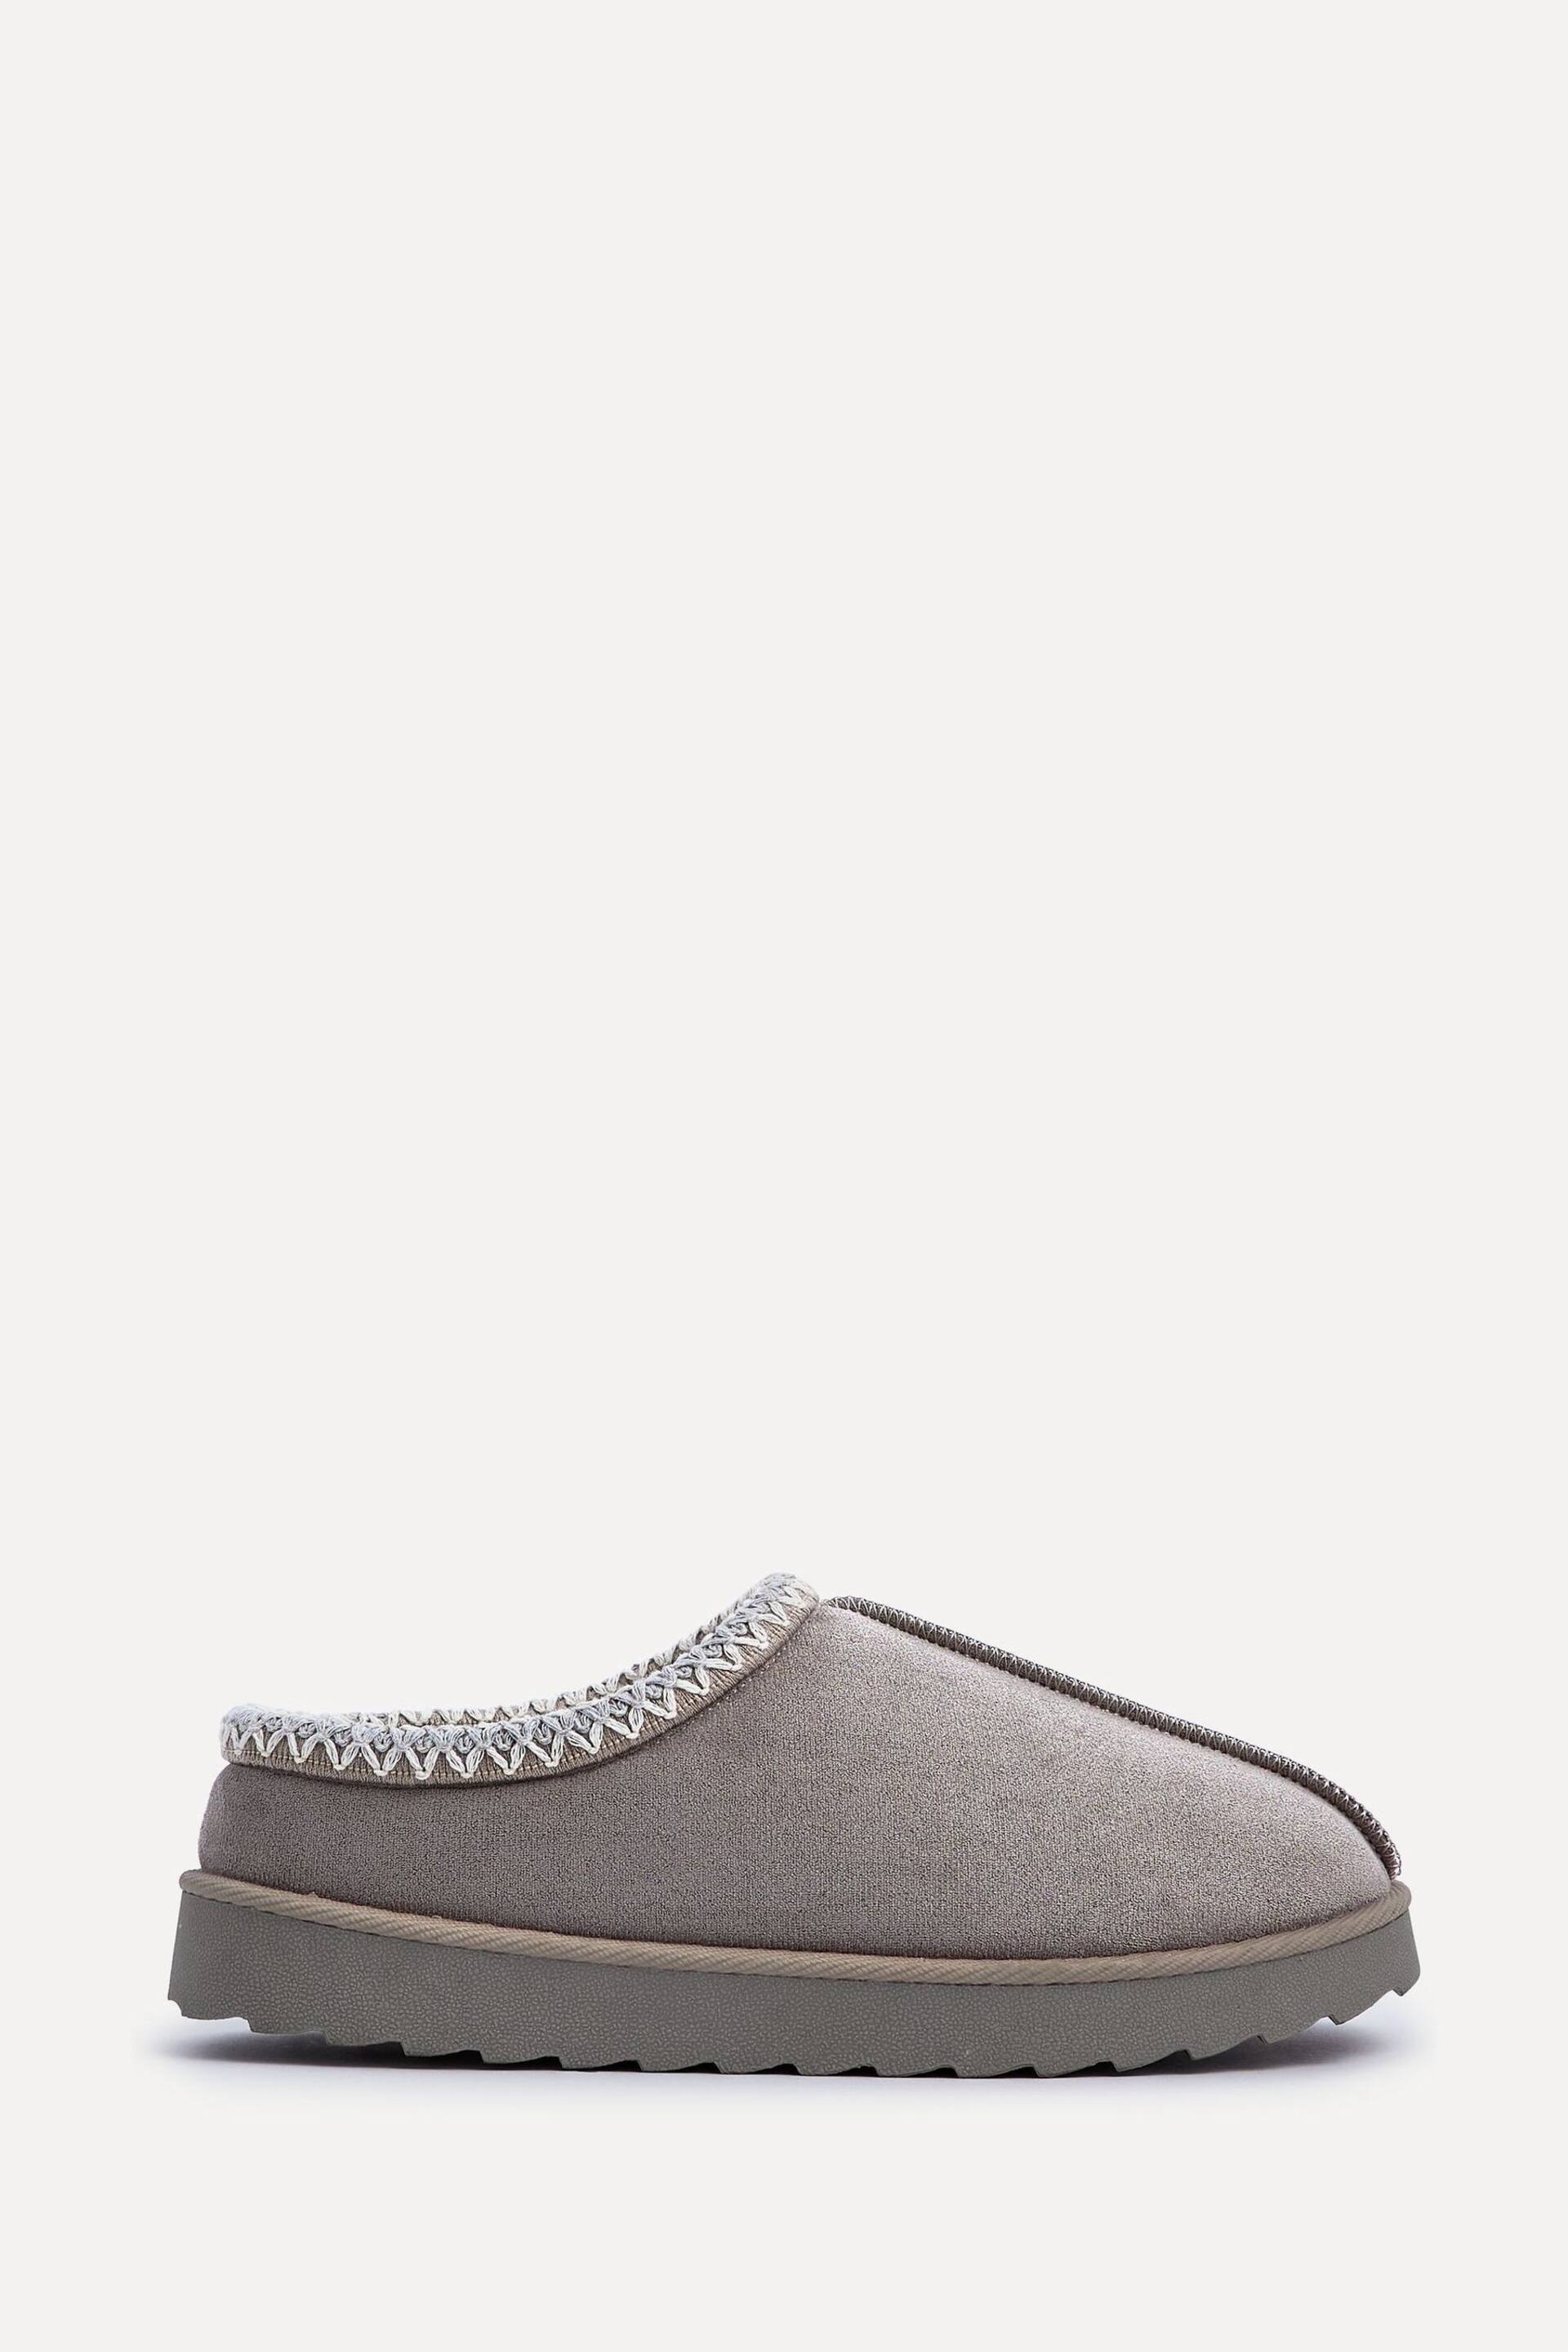 Linzi Grey Tana Faux Suede Slip-On Slippers With Aztec Detail - Image 2 of 5